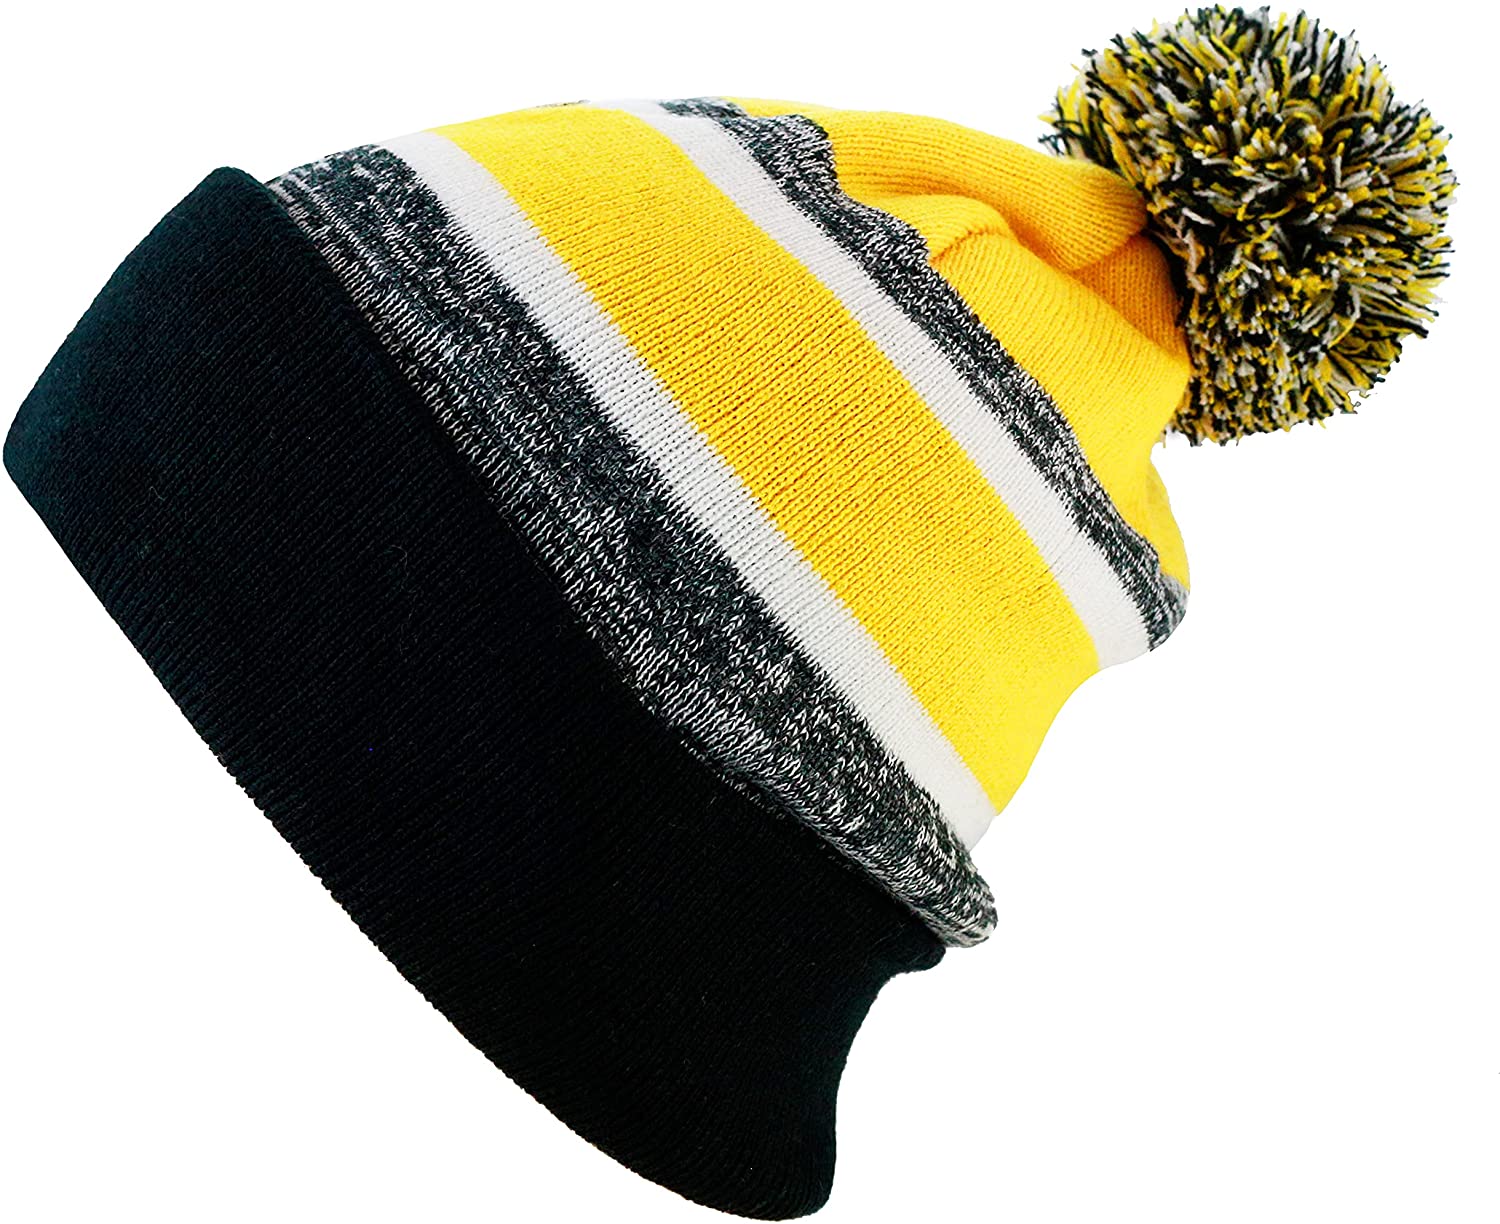 Big Bobble Knitted Ribbed Cable Stripe Pom Pom Beanie Hat Cap Unisex 